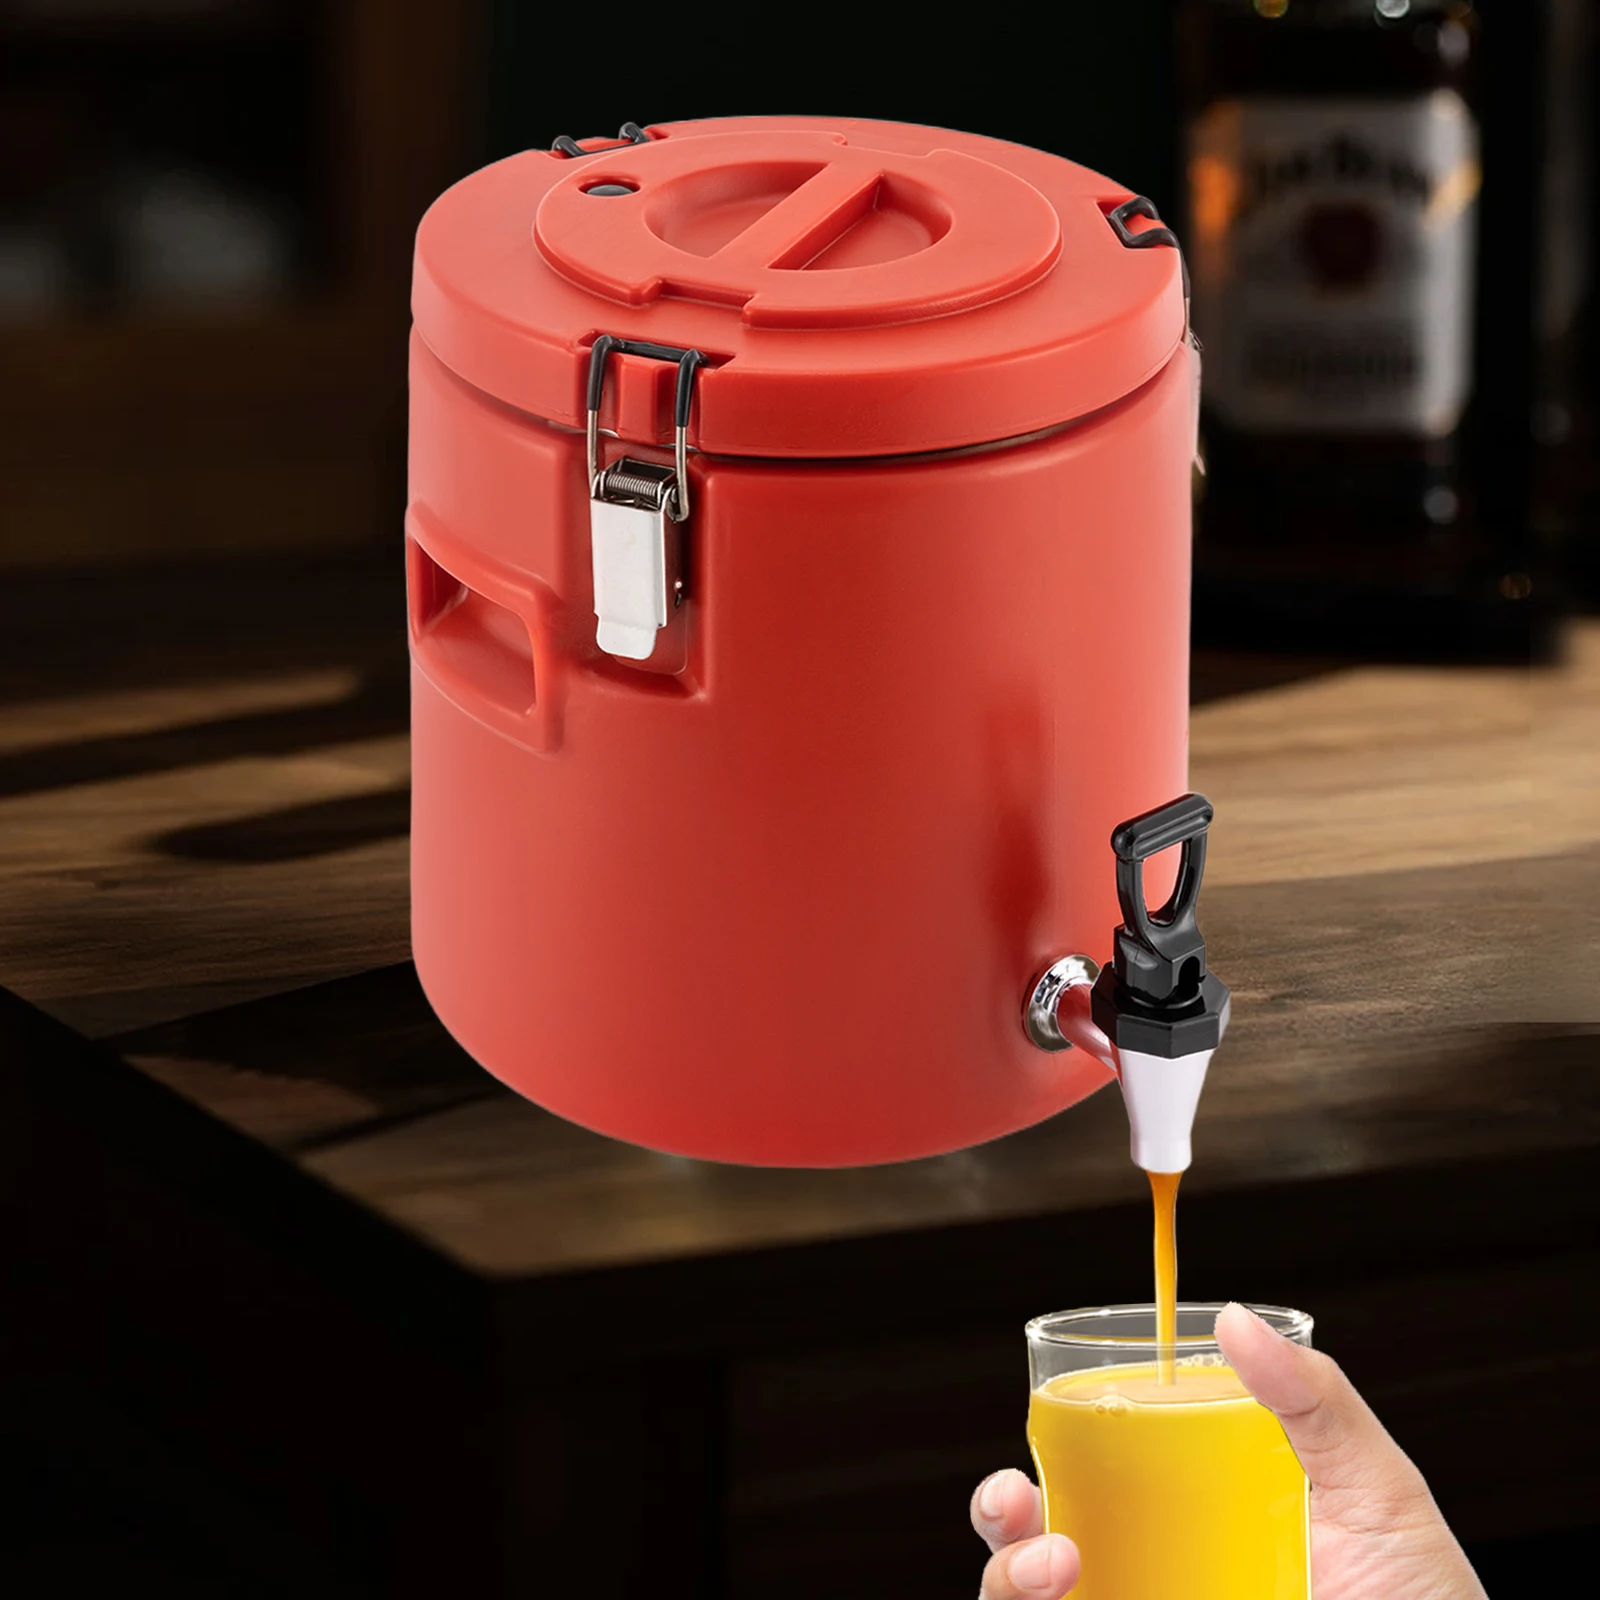 https://ae01.alicdn.com/kf/S7e865fb9983943e7bc01b8332d2c37beZ/Insulated-Thermal-Beverage-Dispenser-Drink-Dispenser-with-Faucet-Hot-and-Cold.jpg